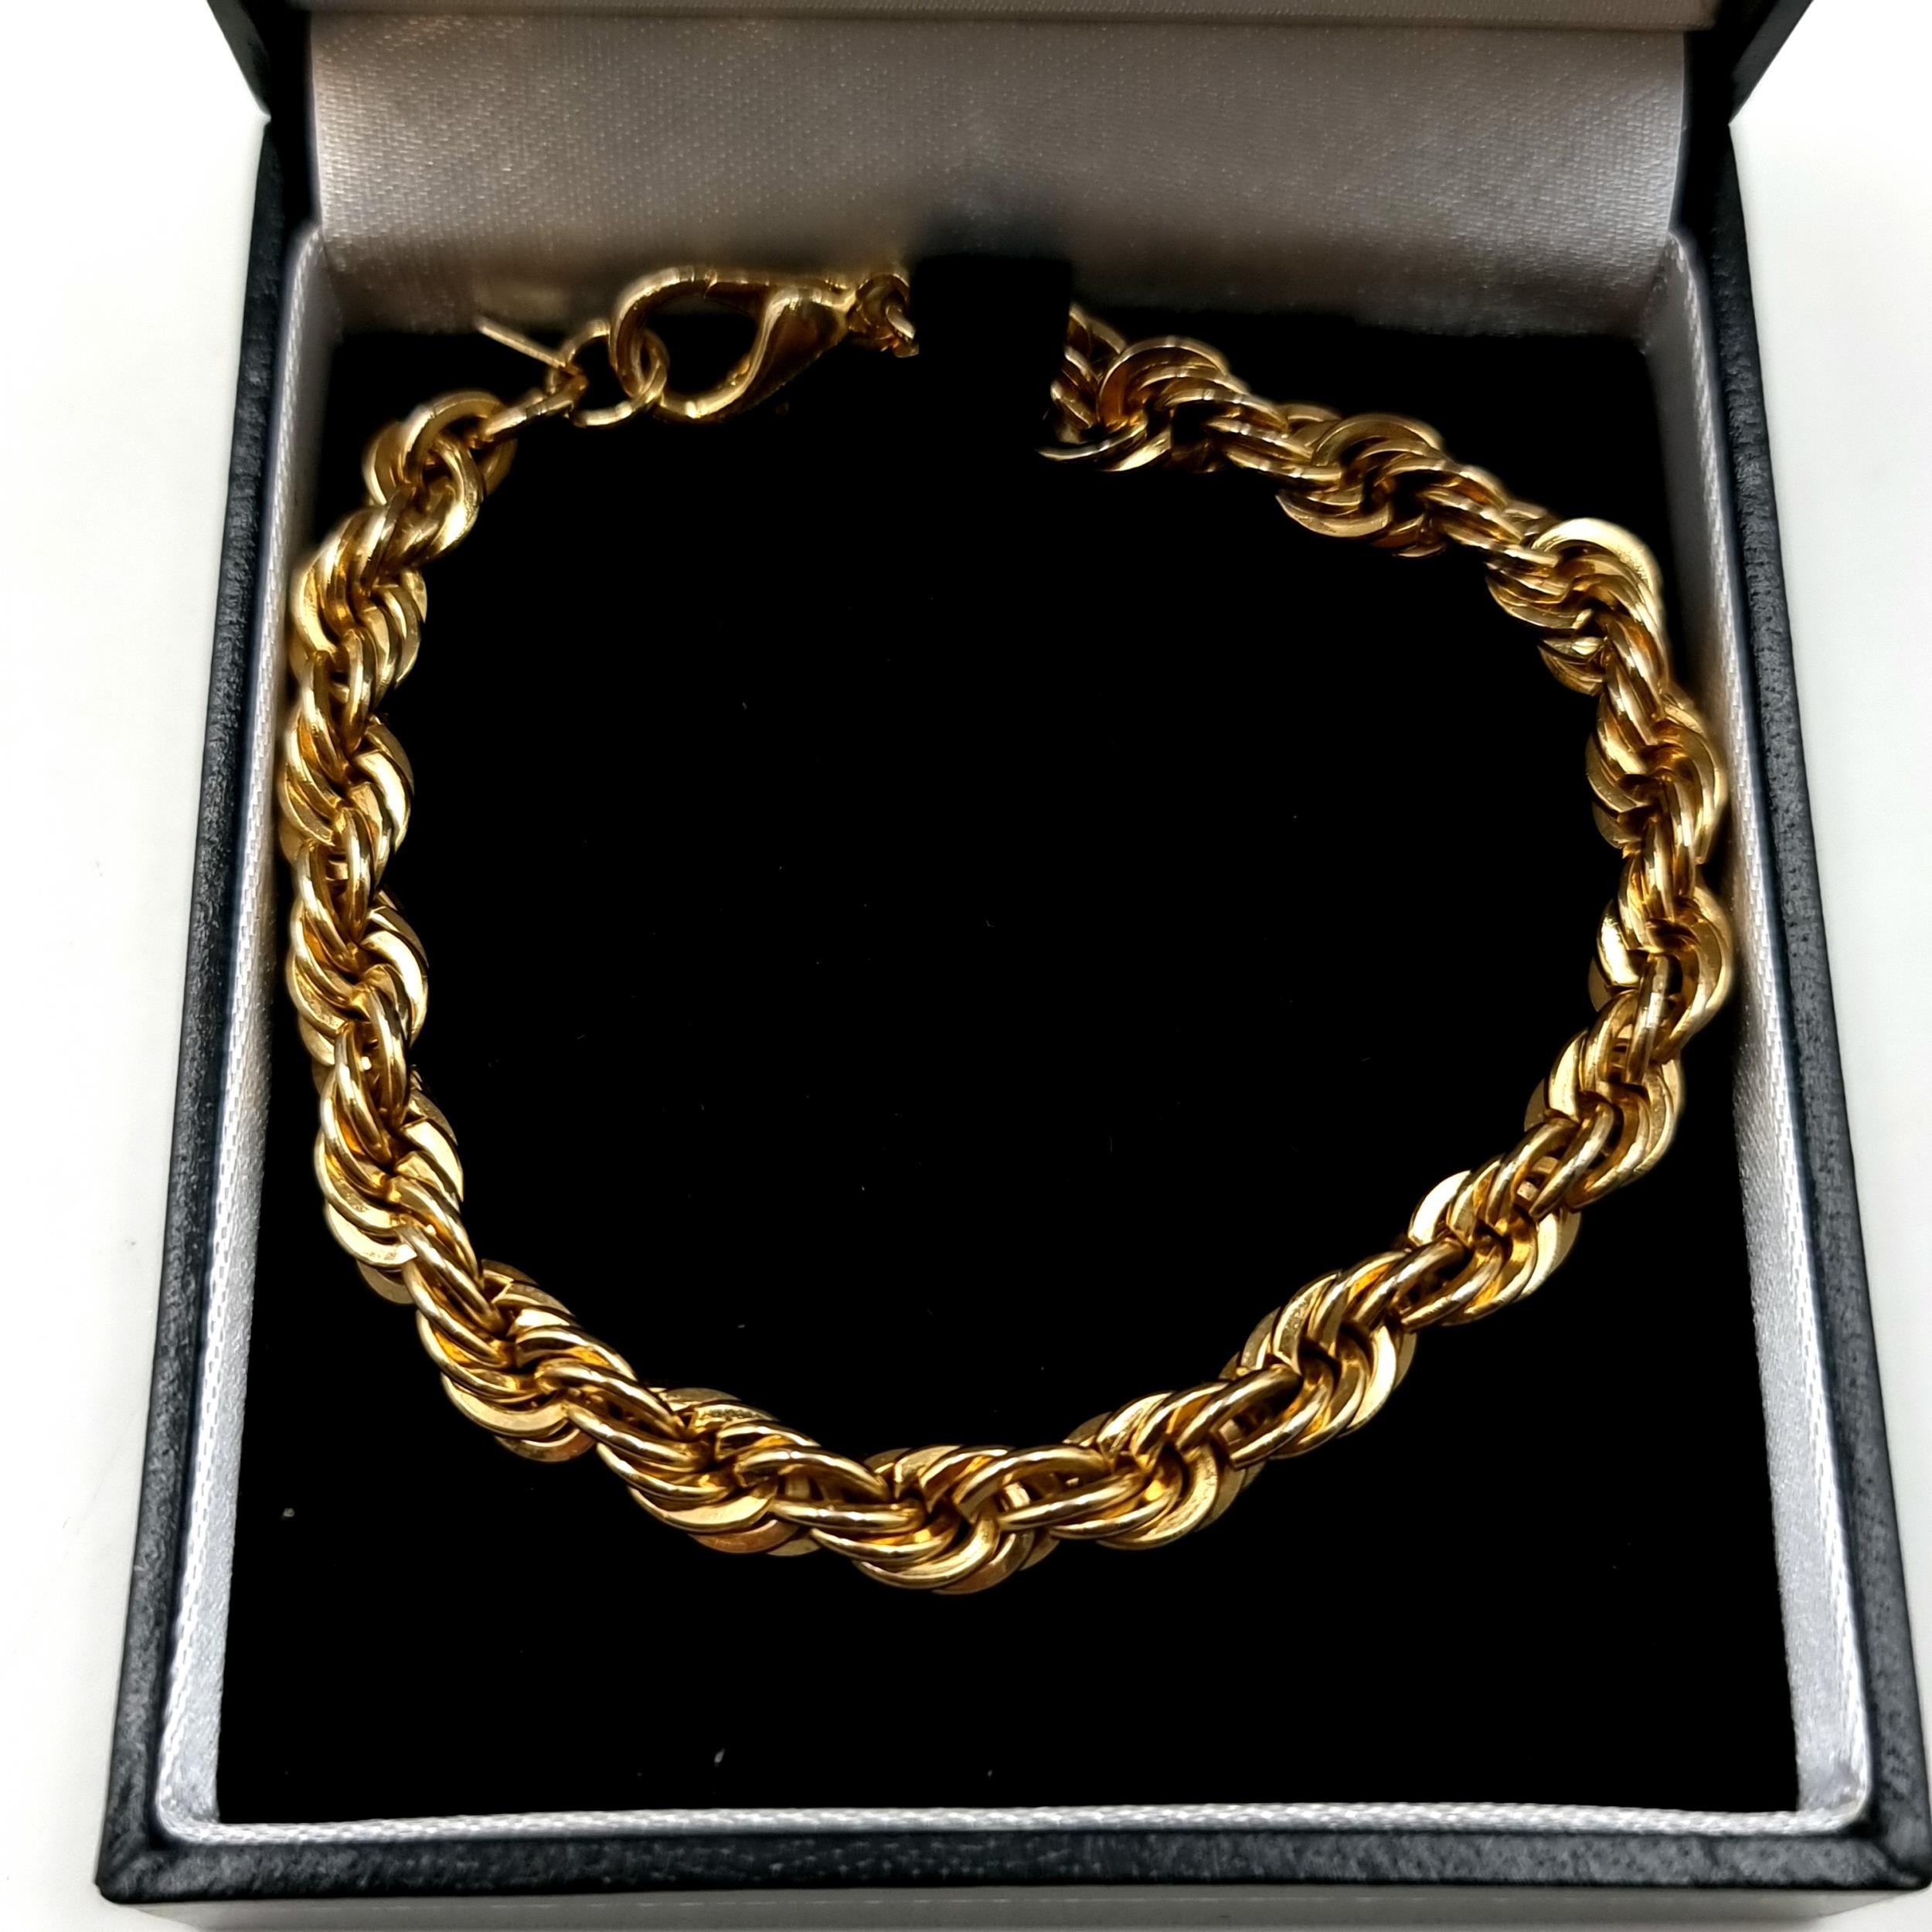 Star Lot : A good quality 9 carat gold plated rope twist bracelet